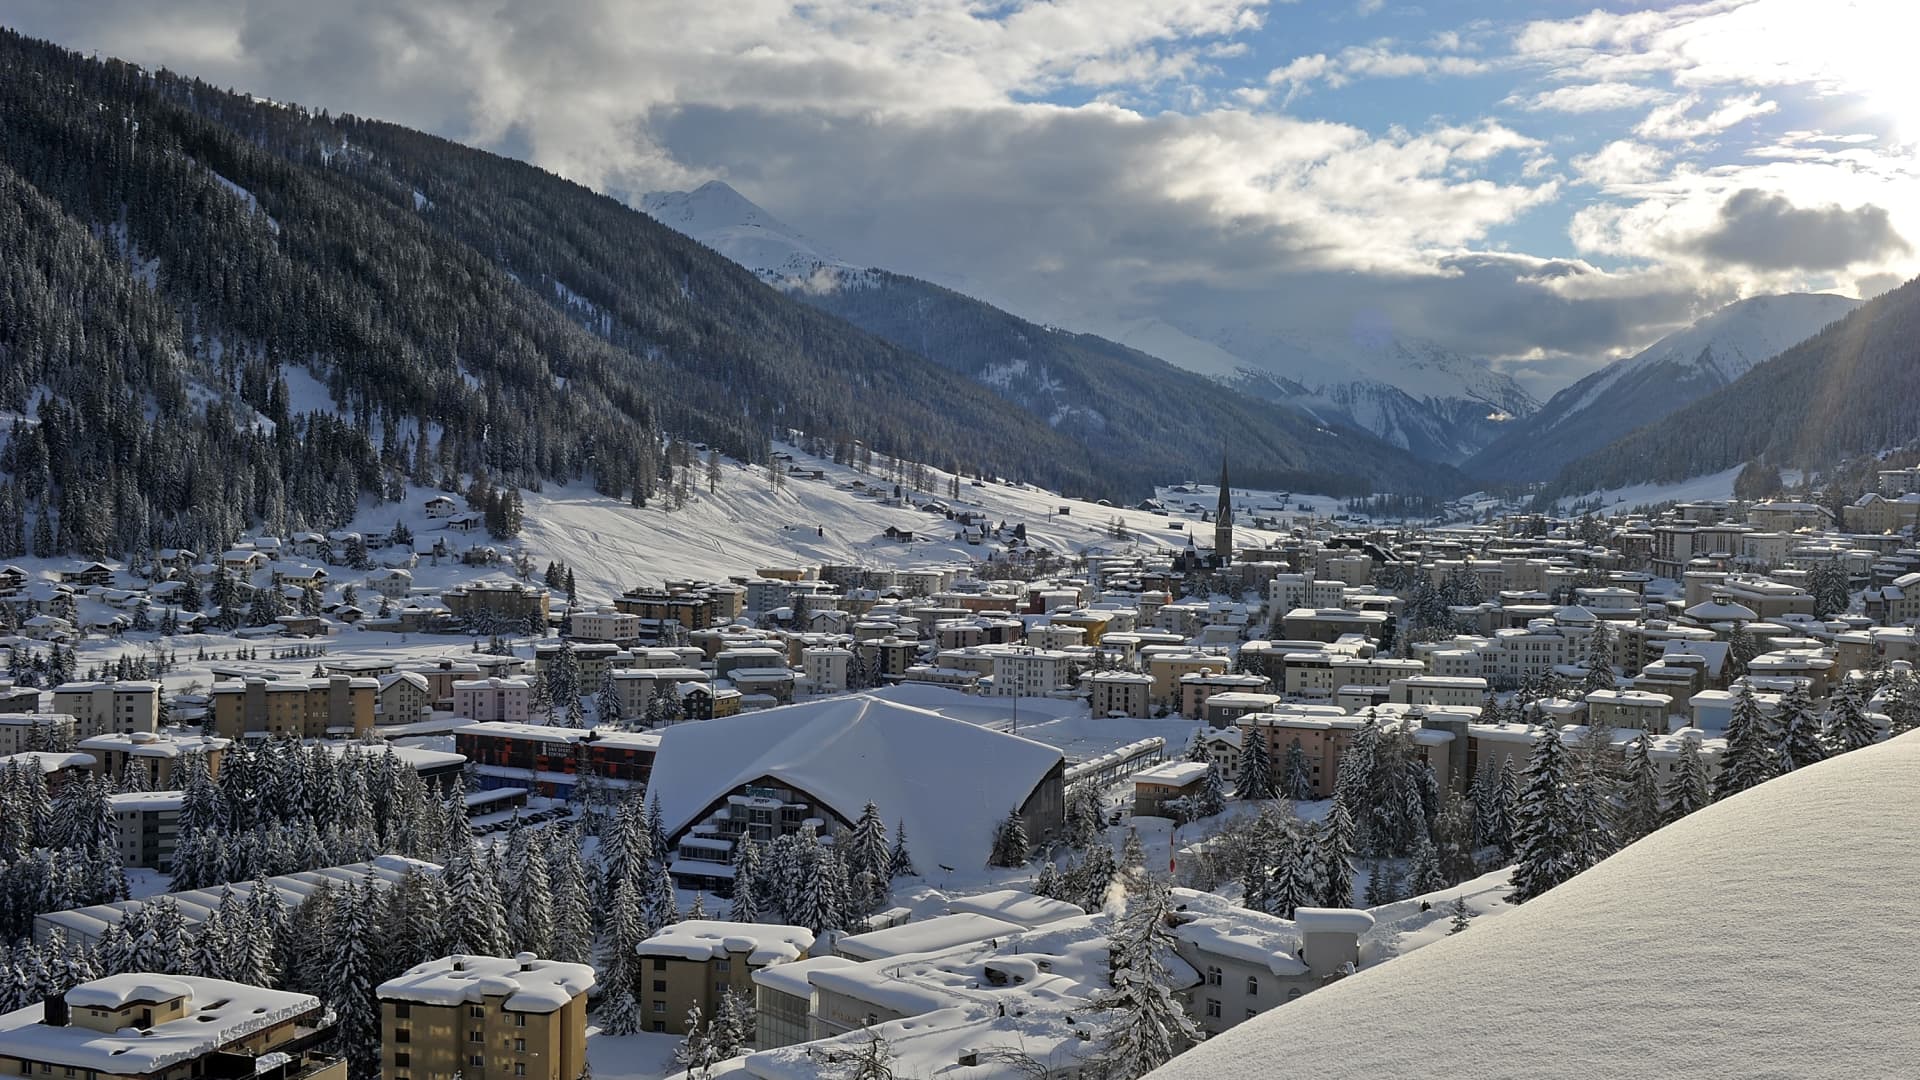 The Swiss ski resort of Davos hosts the annual meeting of the World Economic Forum.